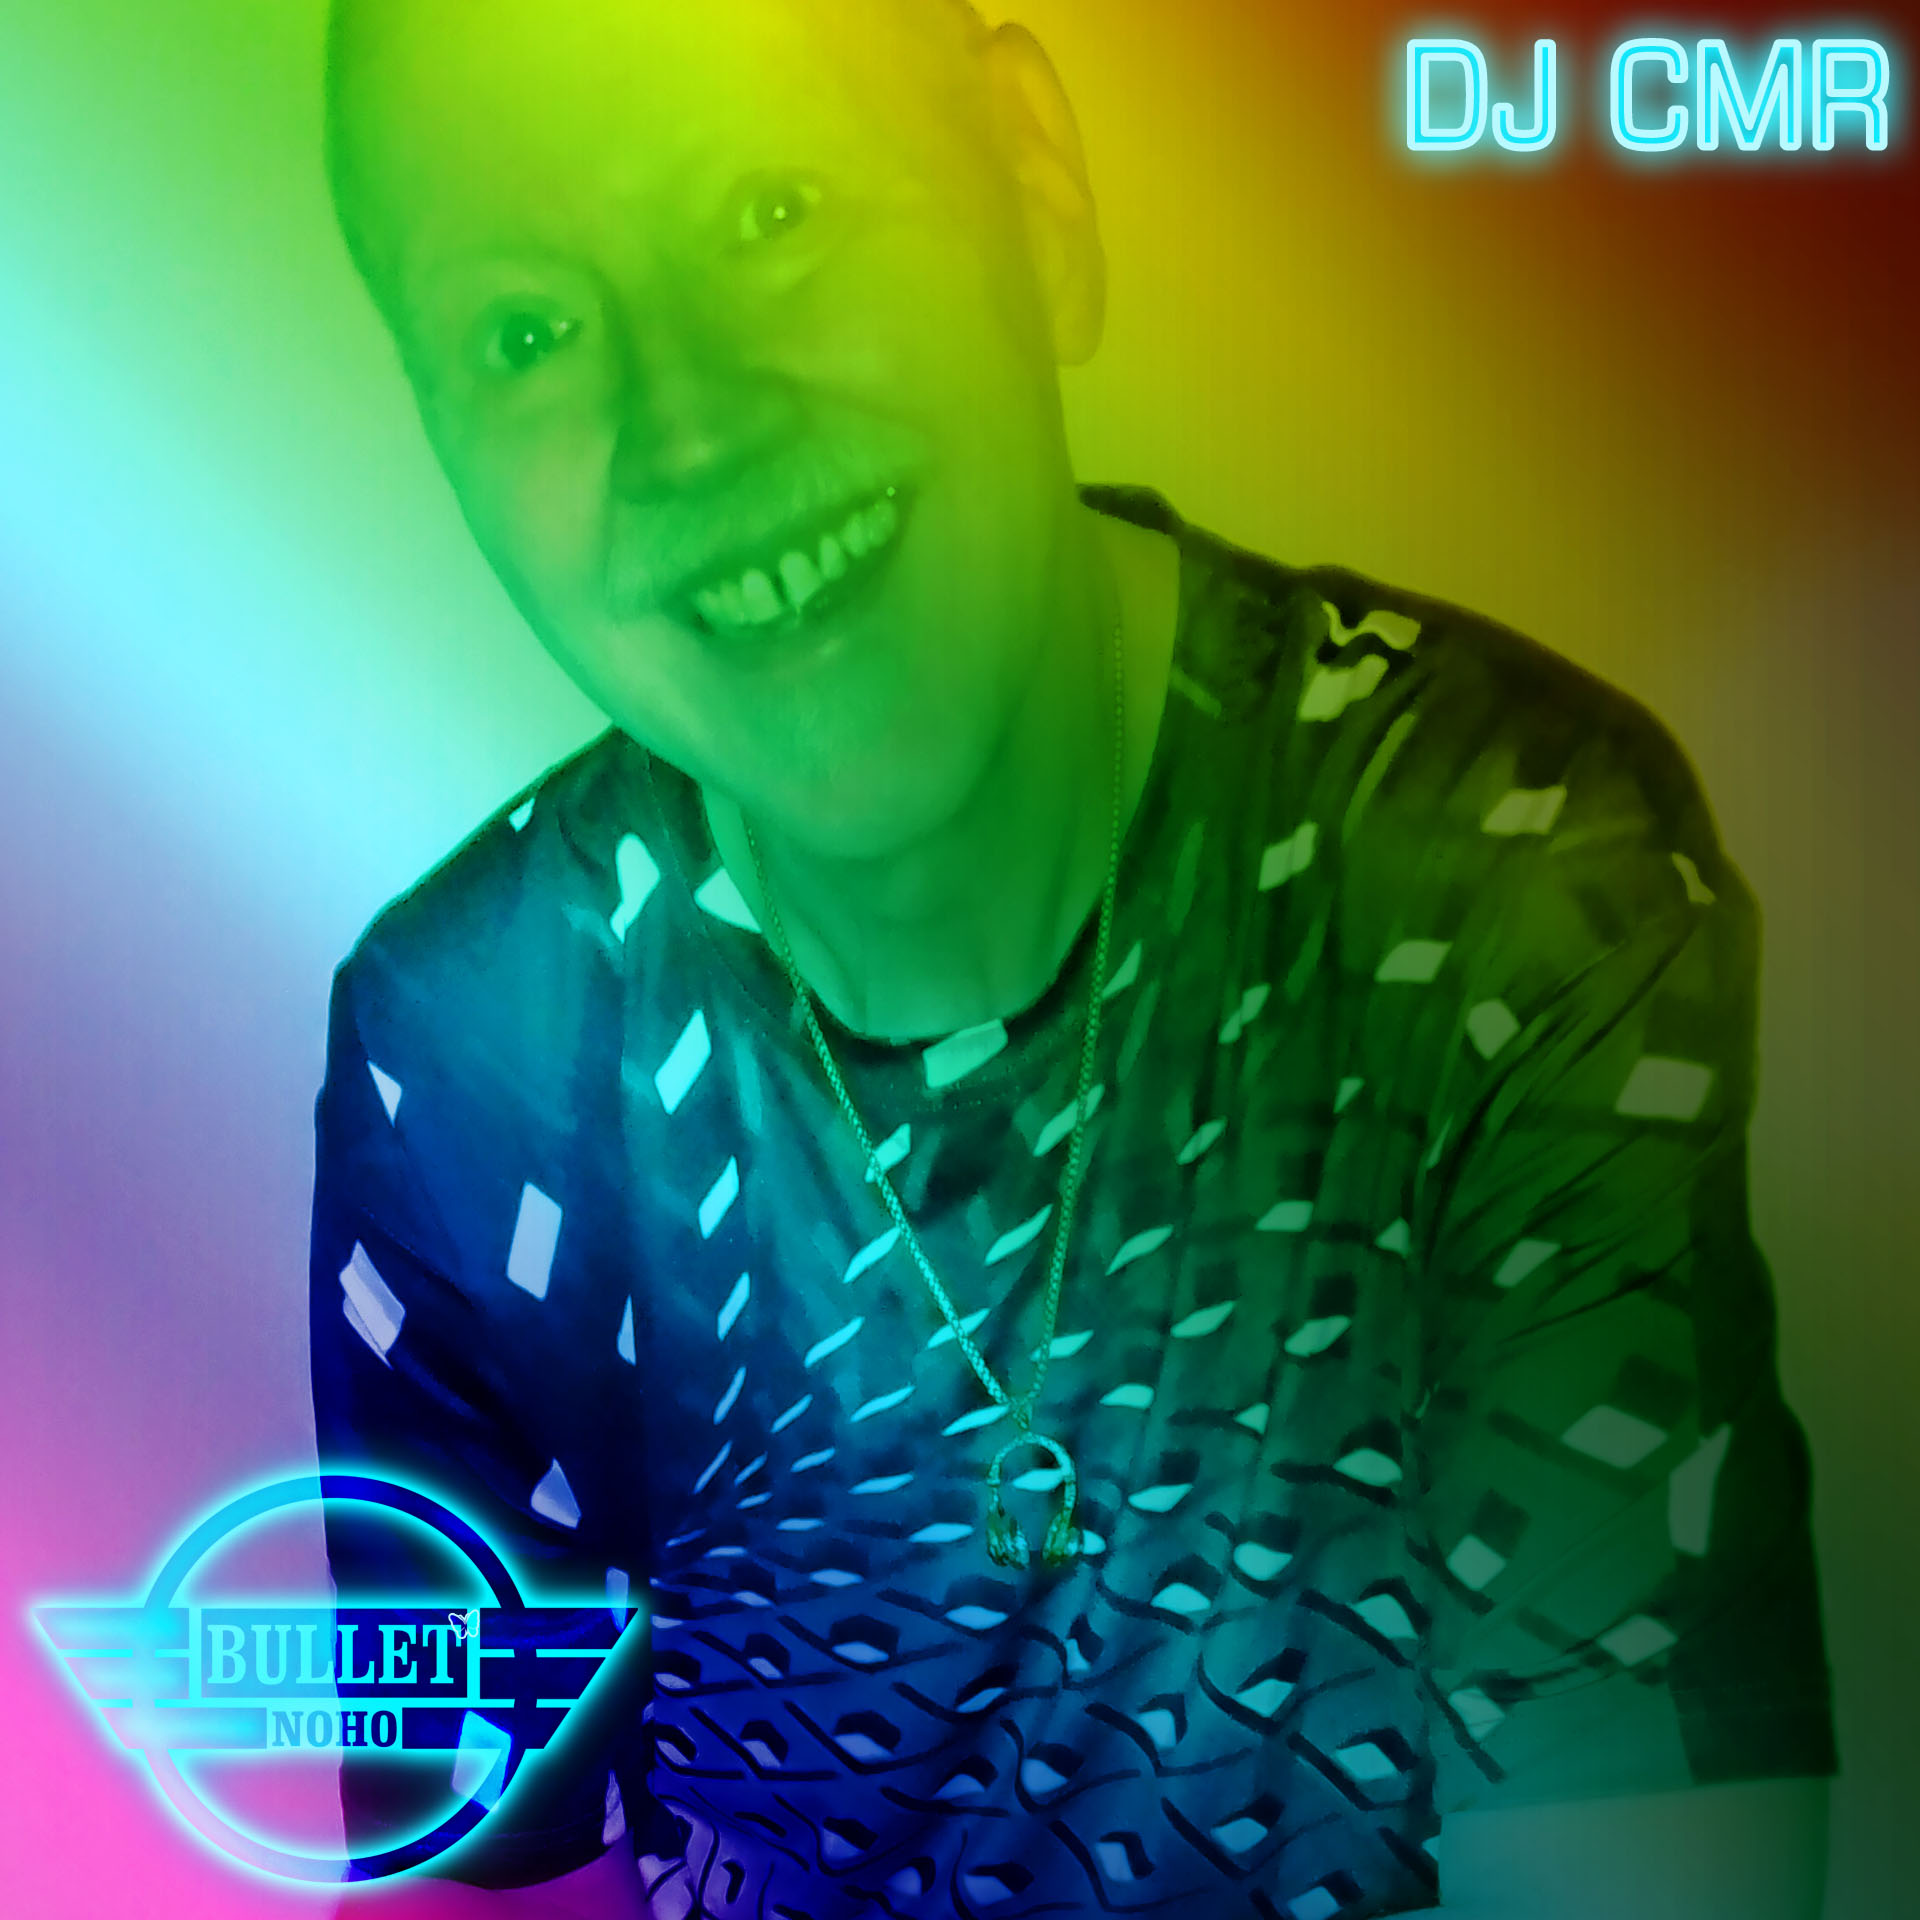 DJ CMR: Friday, 04/26/24 from 8:00 PM to 2:00 AM